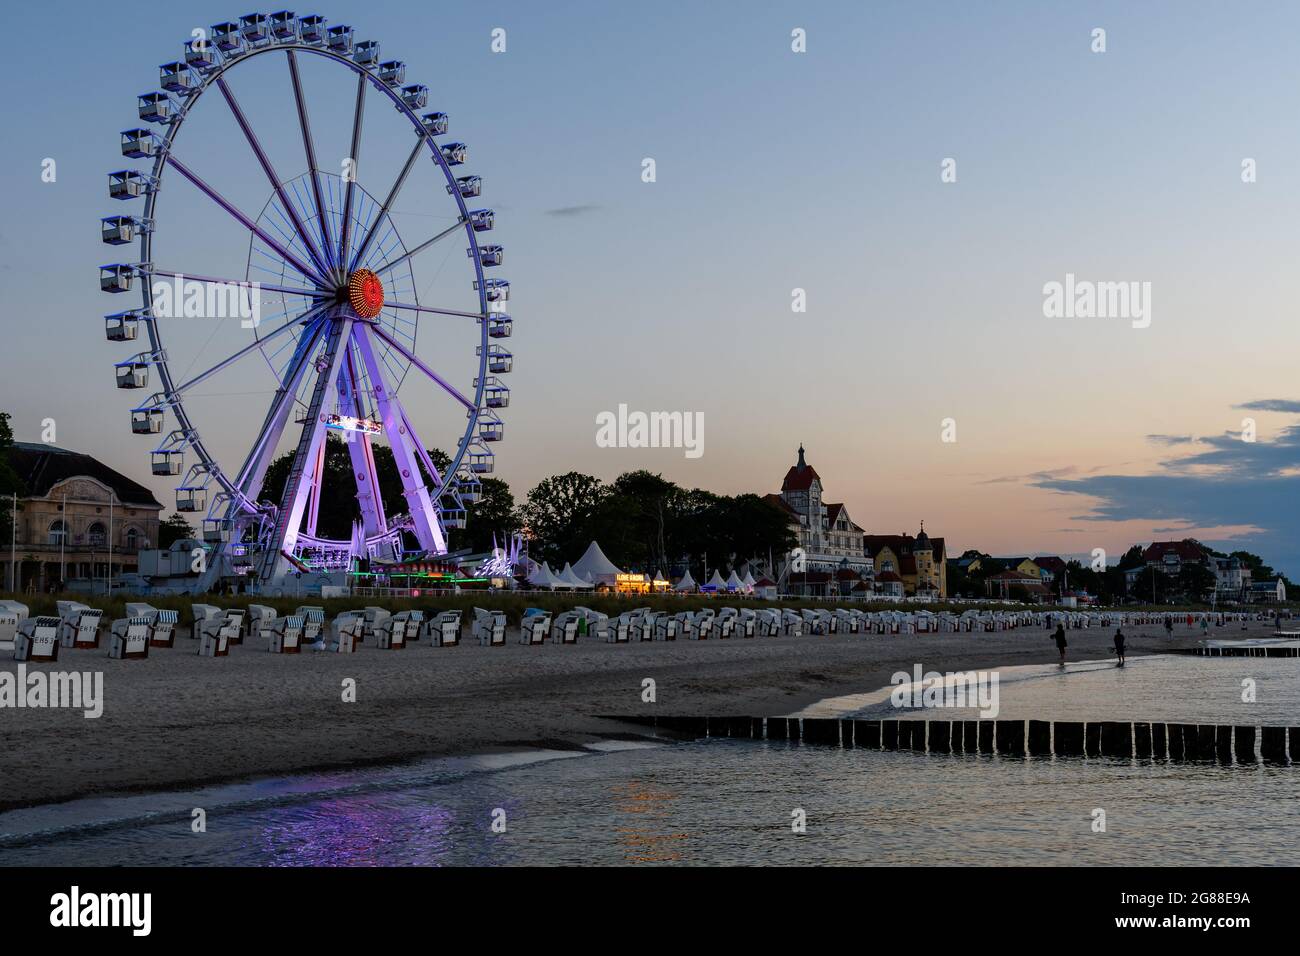 Promenade of Kuehlungsborn with a ferris wheel , Germany Stock Photo